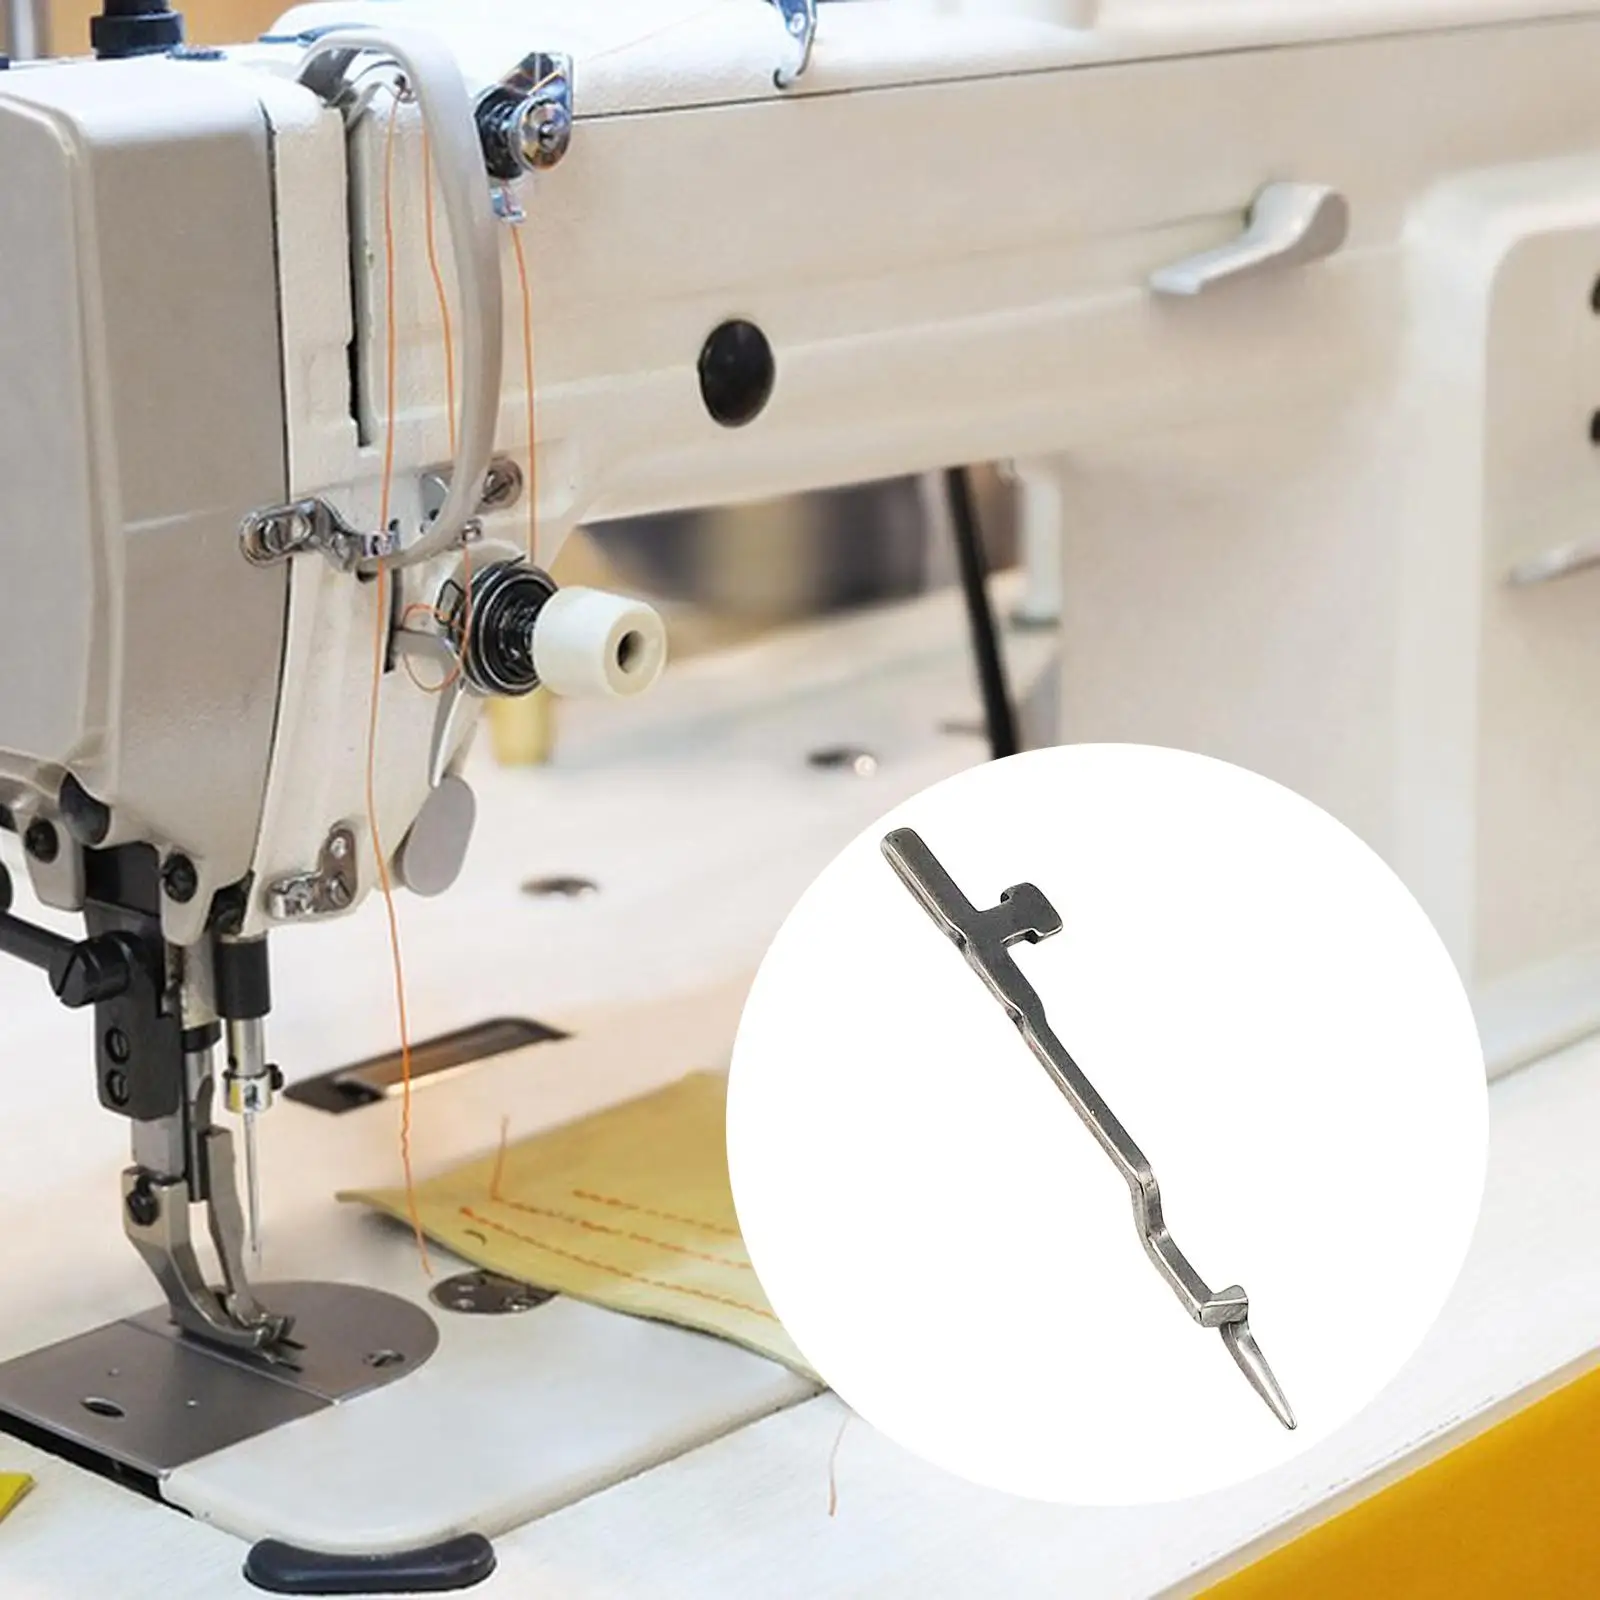 Overlock Lower loop Industrial Domestic Accessories Easy to Use Portable Sturdy Sewing Machine Needles Overlock over looping